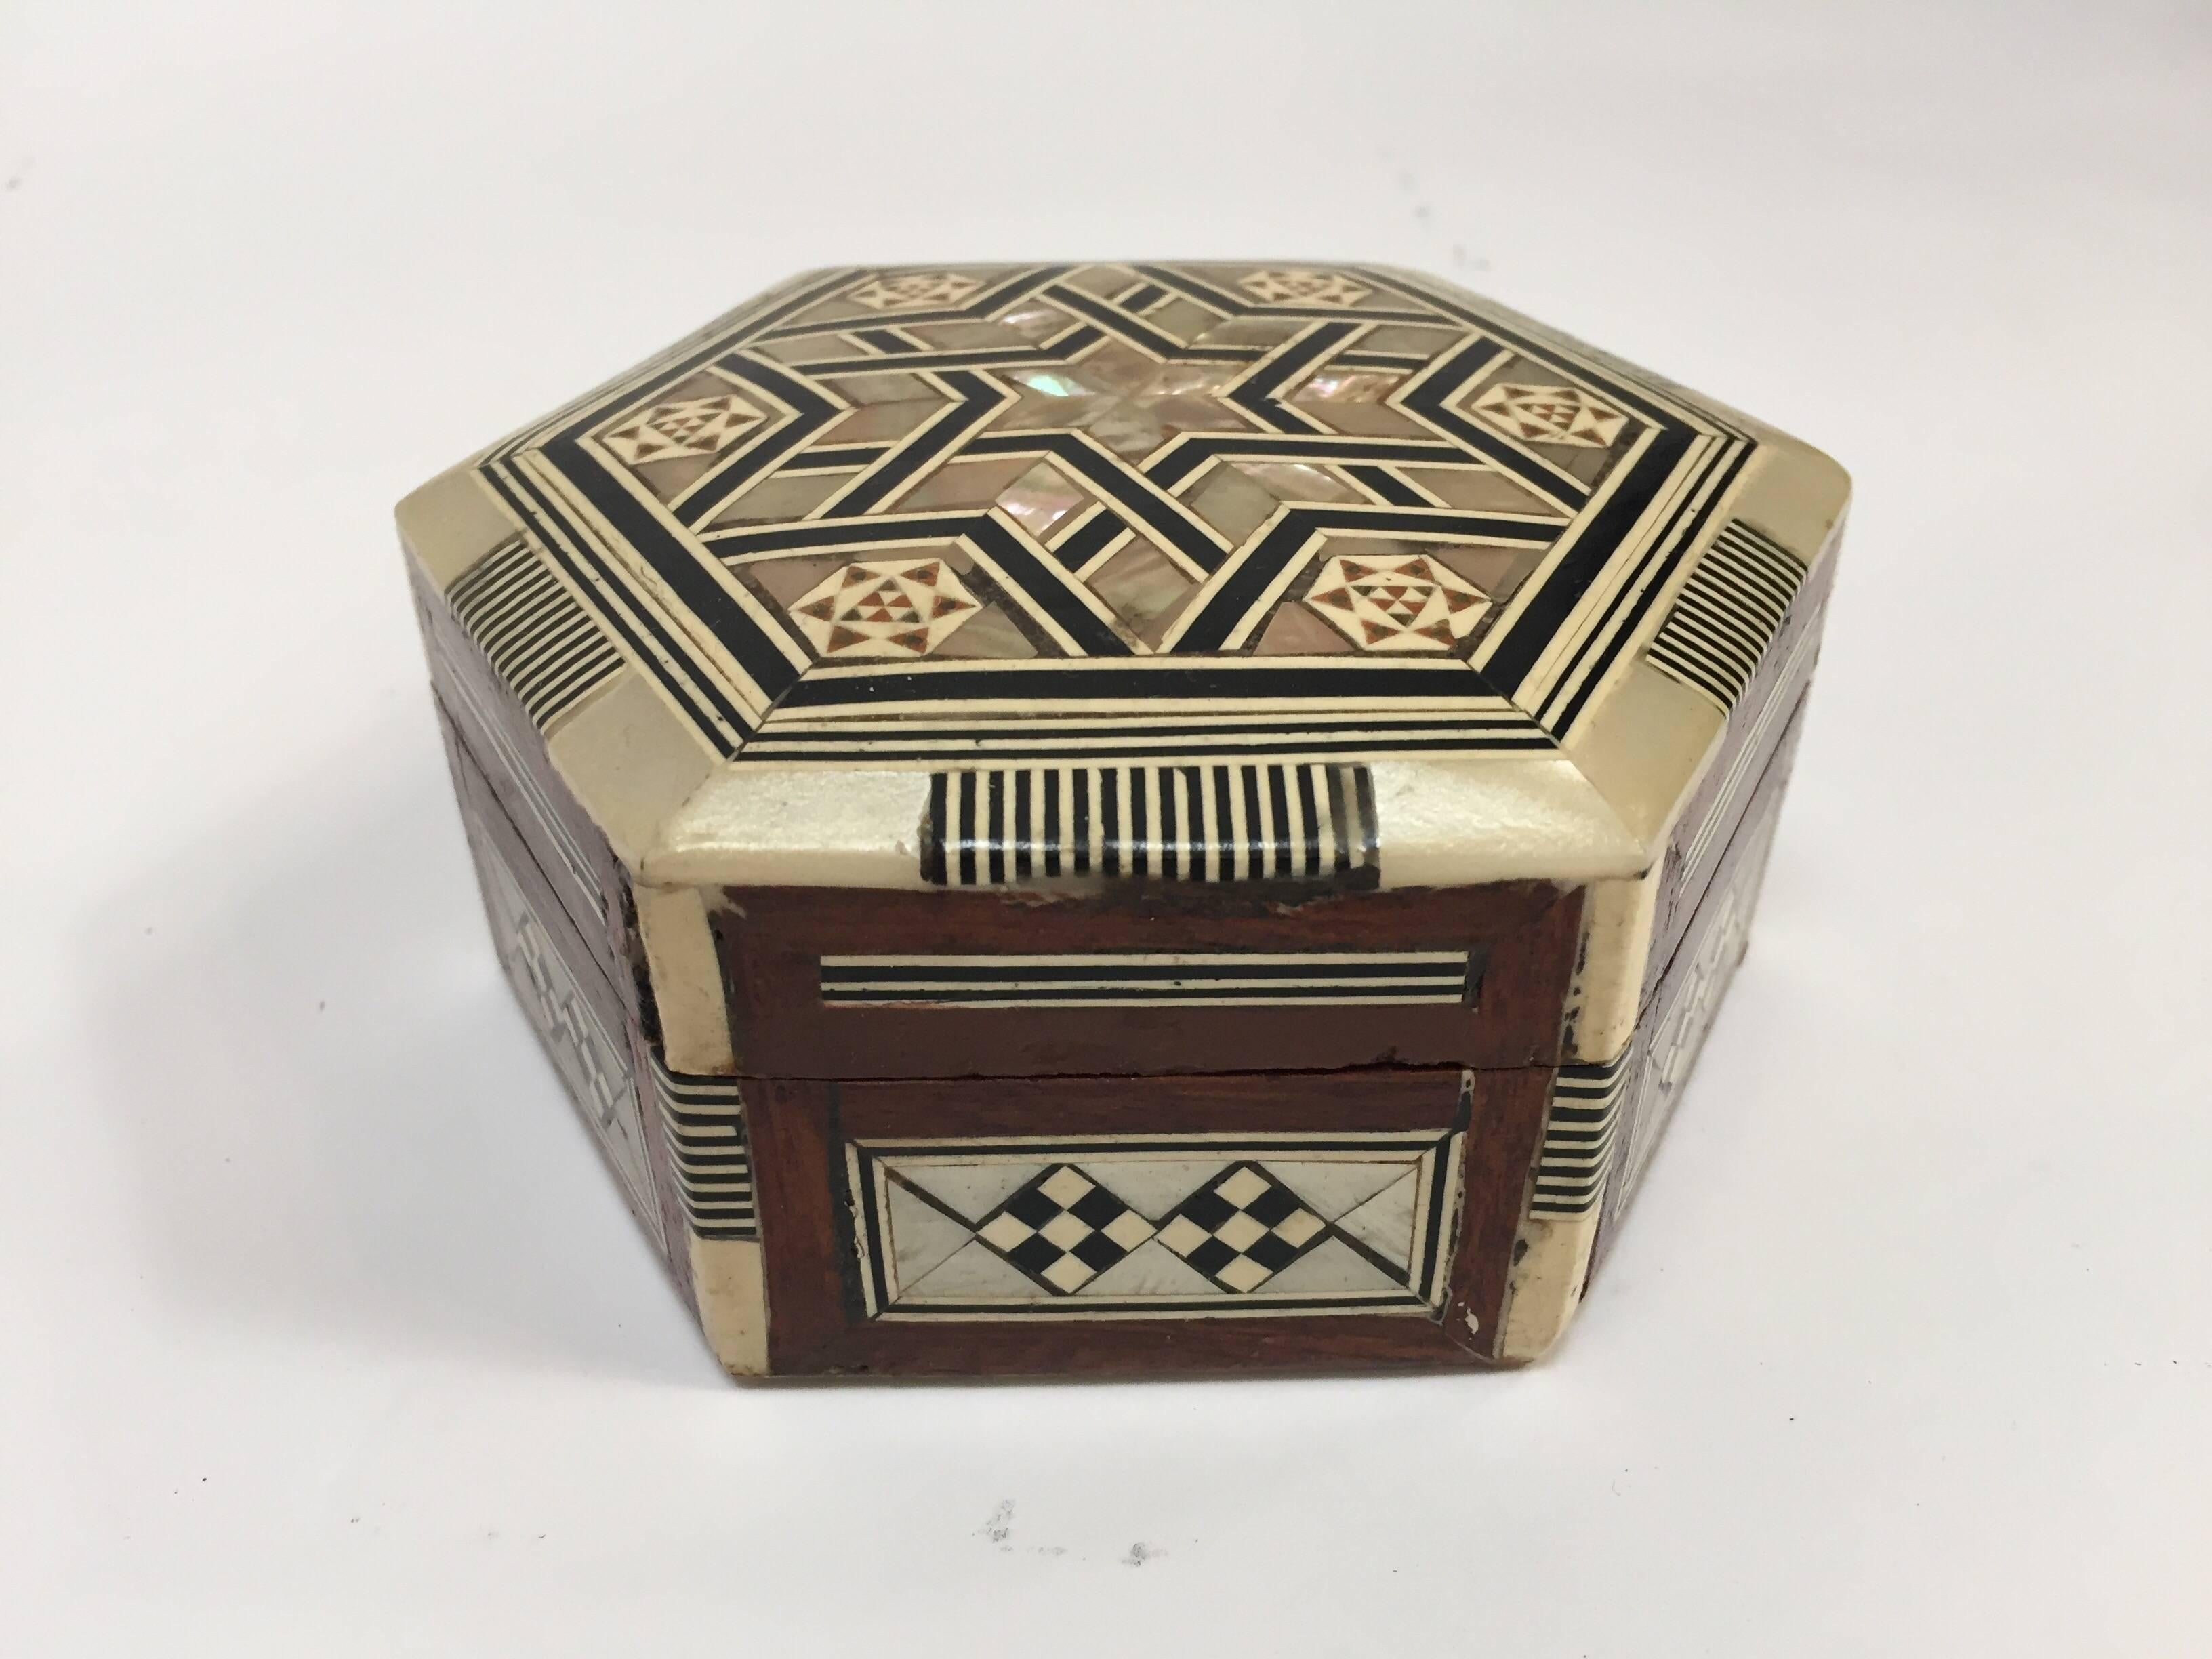 Exquisite handcrafted Middle Eastern Syrian mother-of-pearl inlaid walnut wood box.
Small octagonal box intricately decorated with Moorish motif designs which have been painstakingly inlaid with mother-of-pearl and fruitwoods.
Syrian walnut wood box